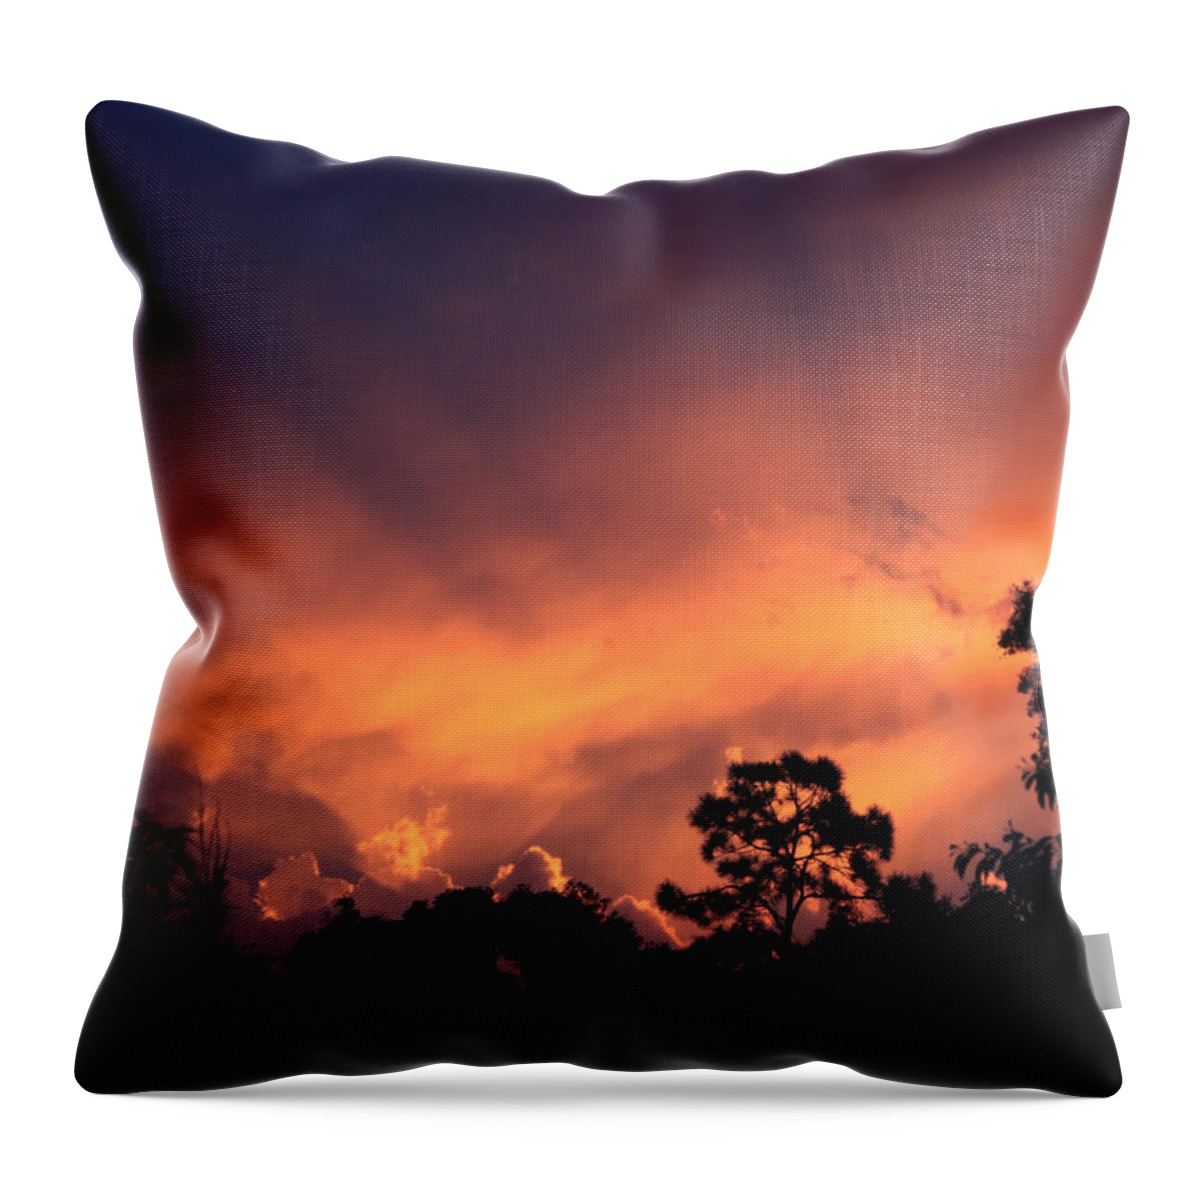 Red Sky Throw Pillow featuring the photograph Sailor Take Warning by Joseph G Holland